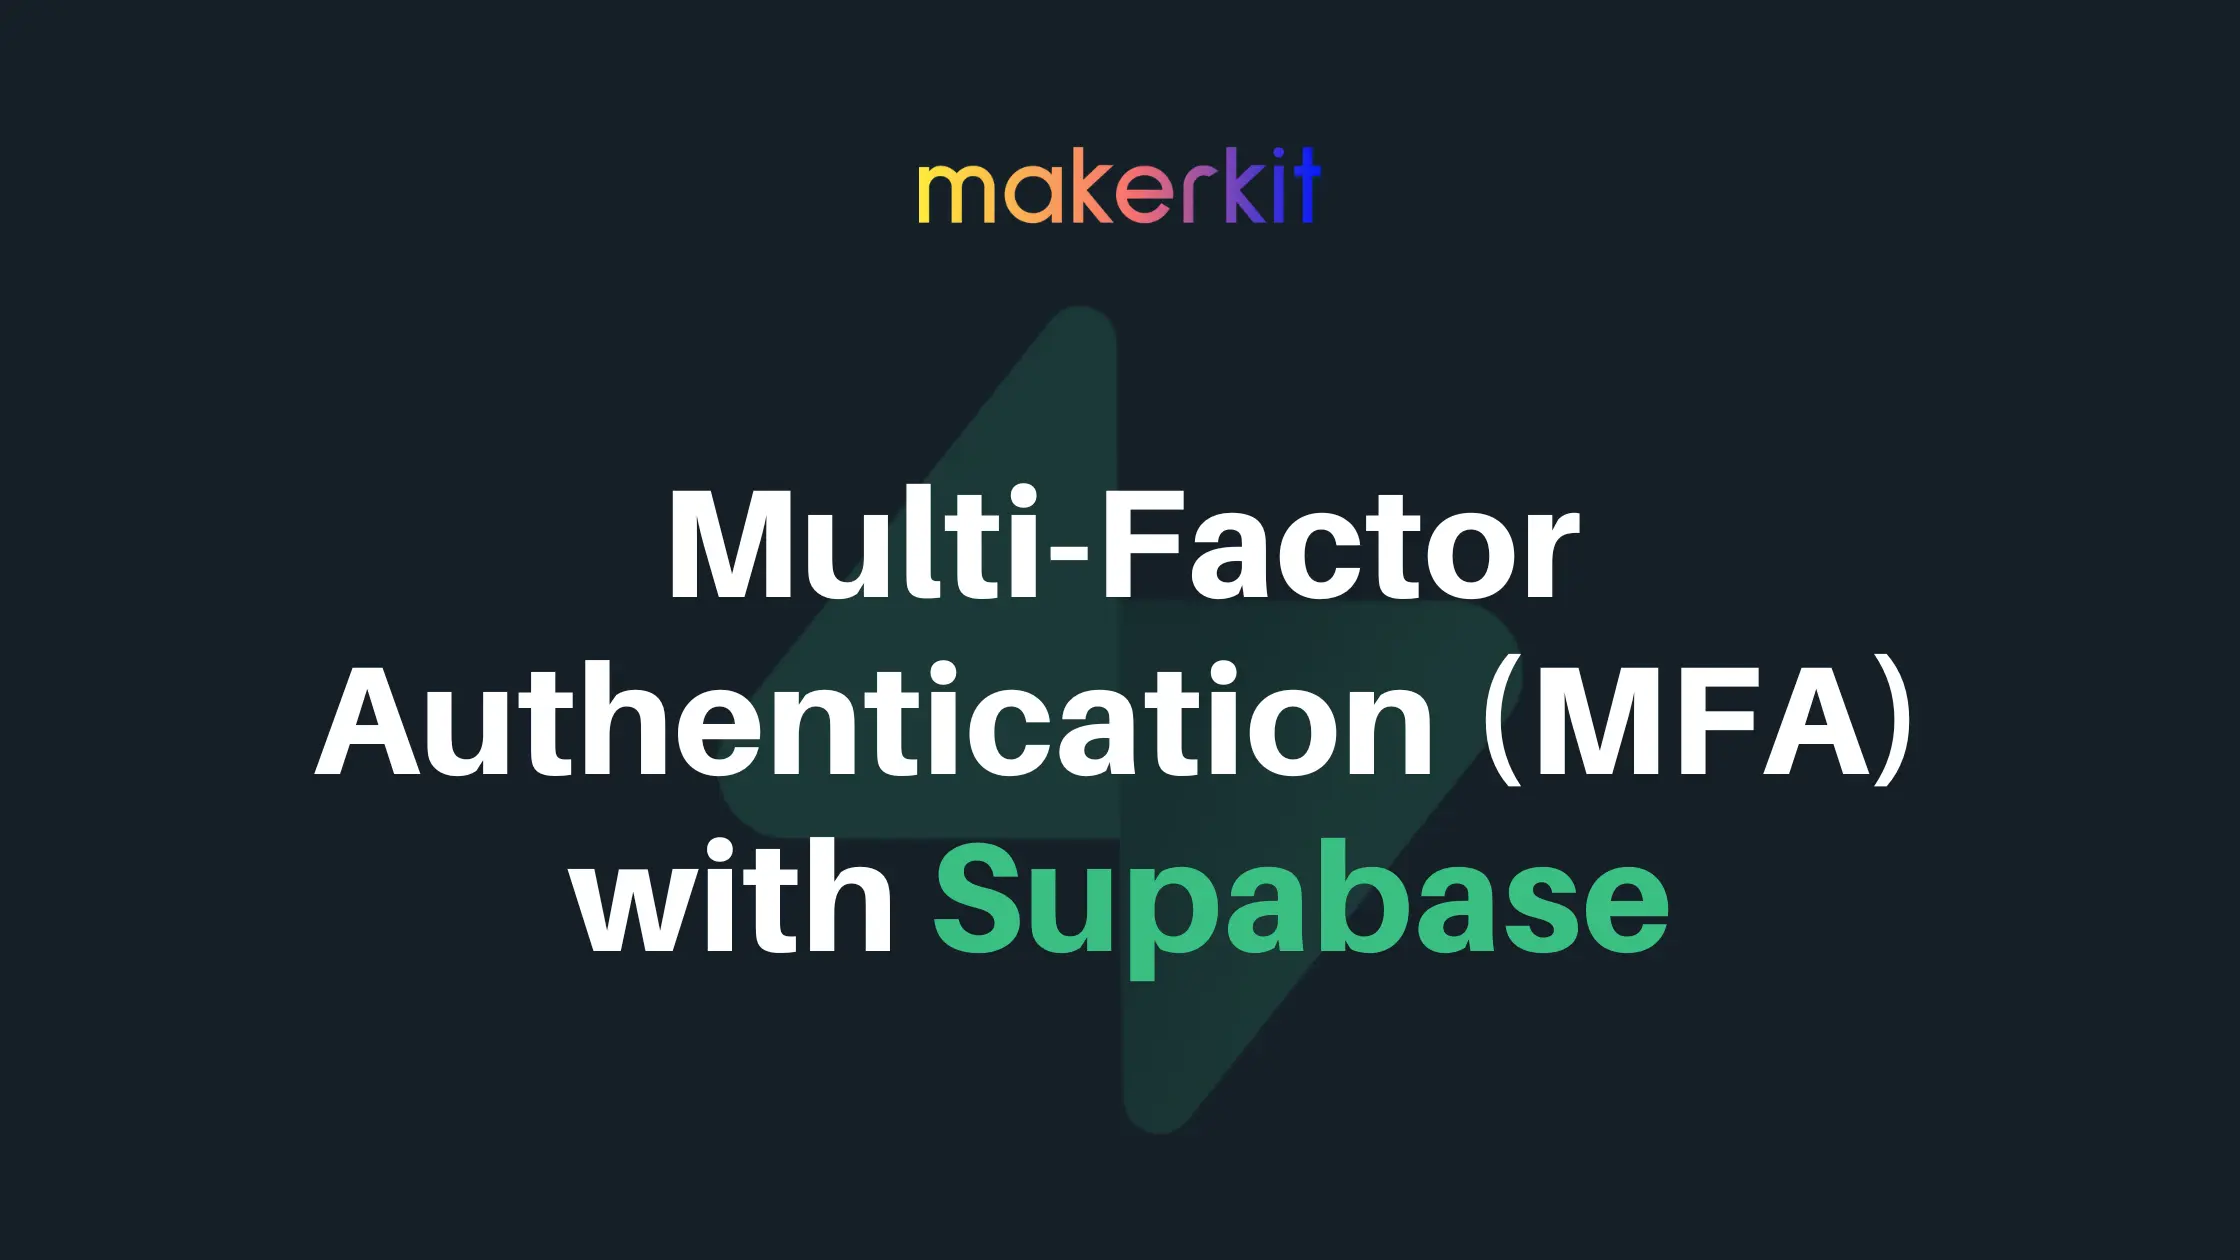 Cover Image for Announcing support for Multi-Factor Authentication (MFA) with Supabase